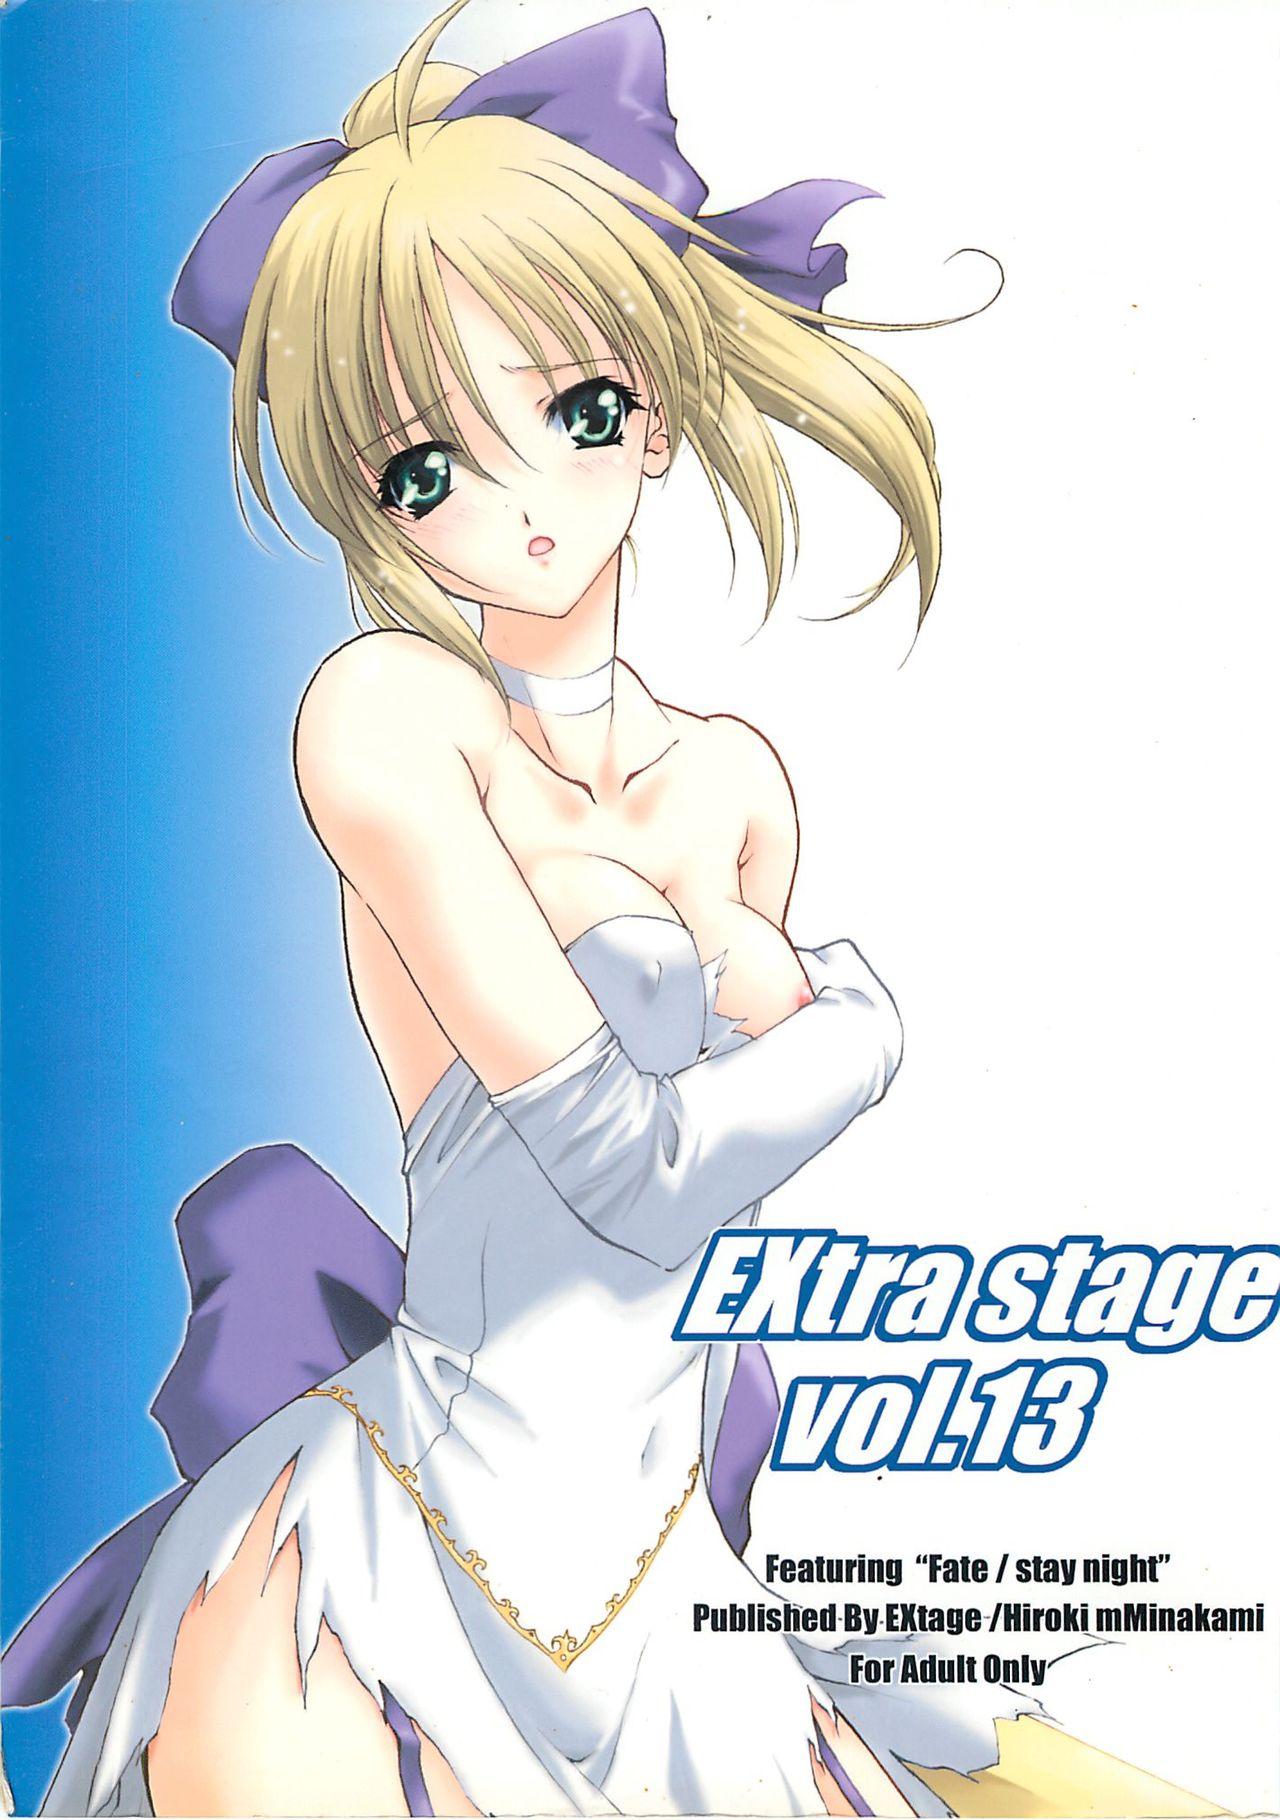 Lolicon EXtra stage vol. 13 - Fate stay night Blackwoman - Picture 1